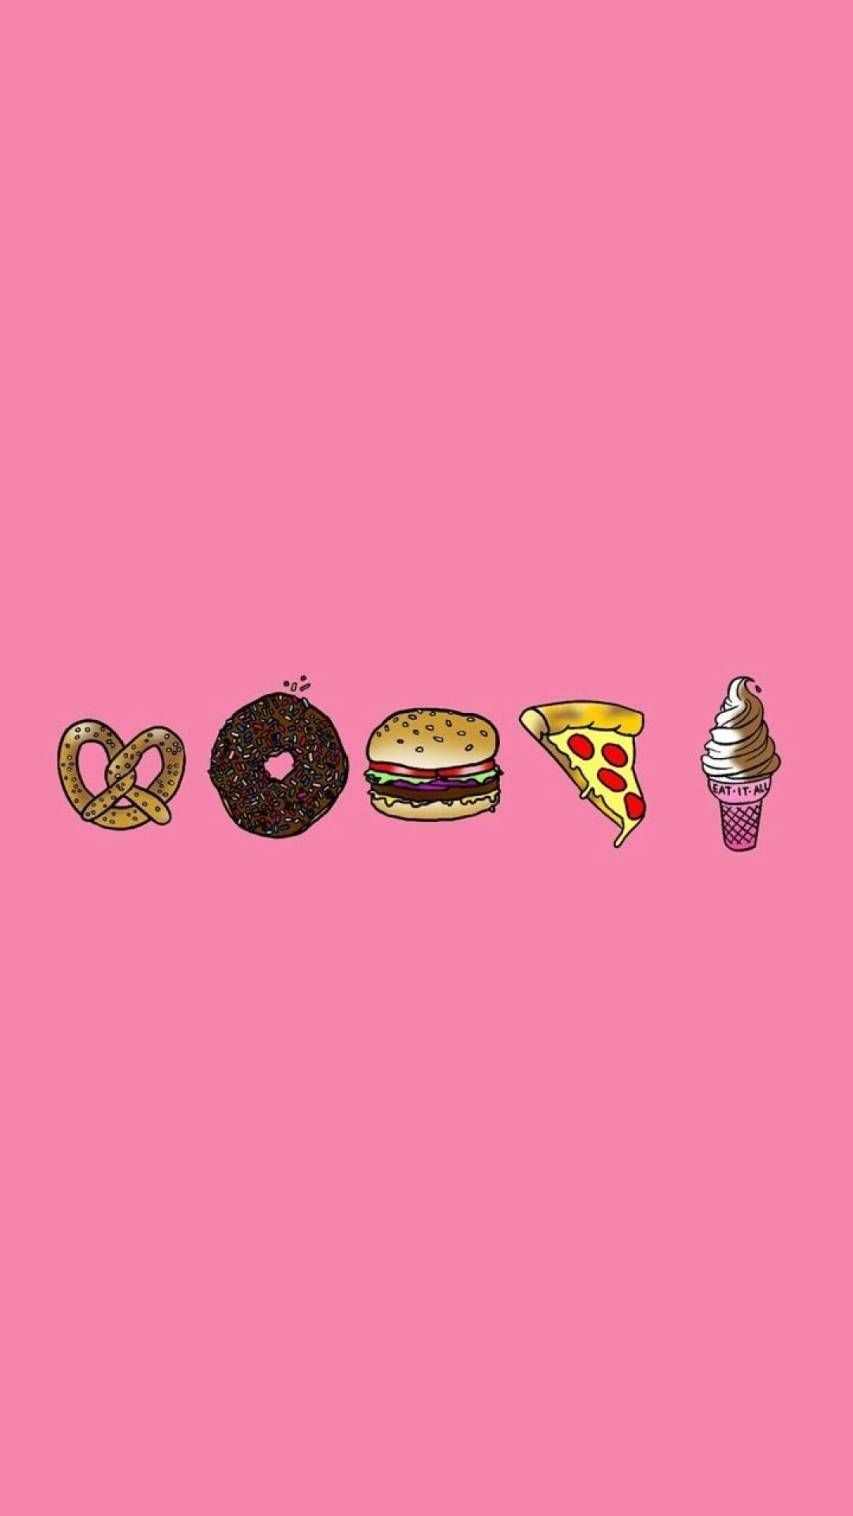 A pink background with various food items - Pink, cute pink, pink phone